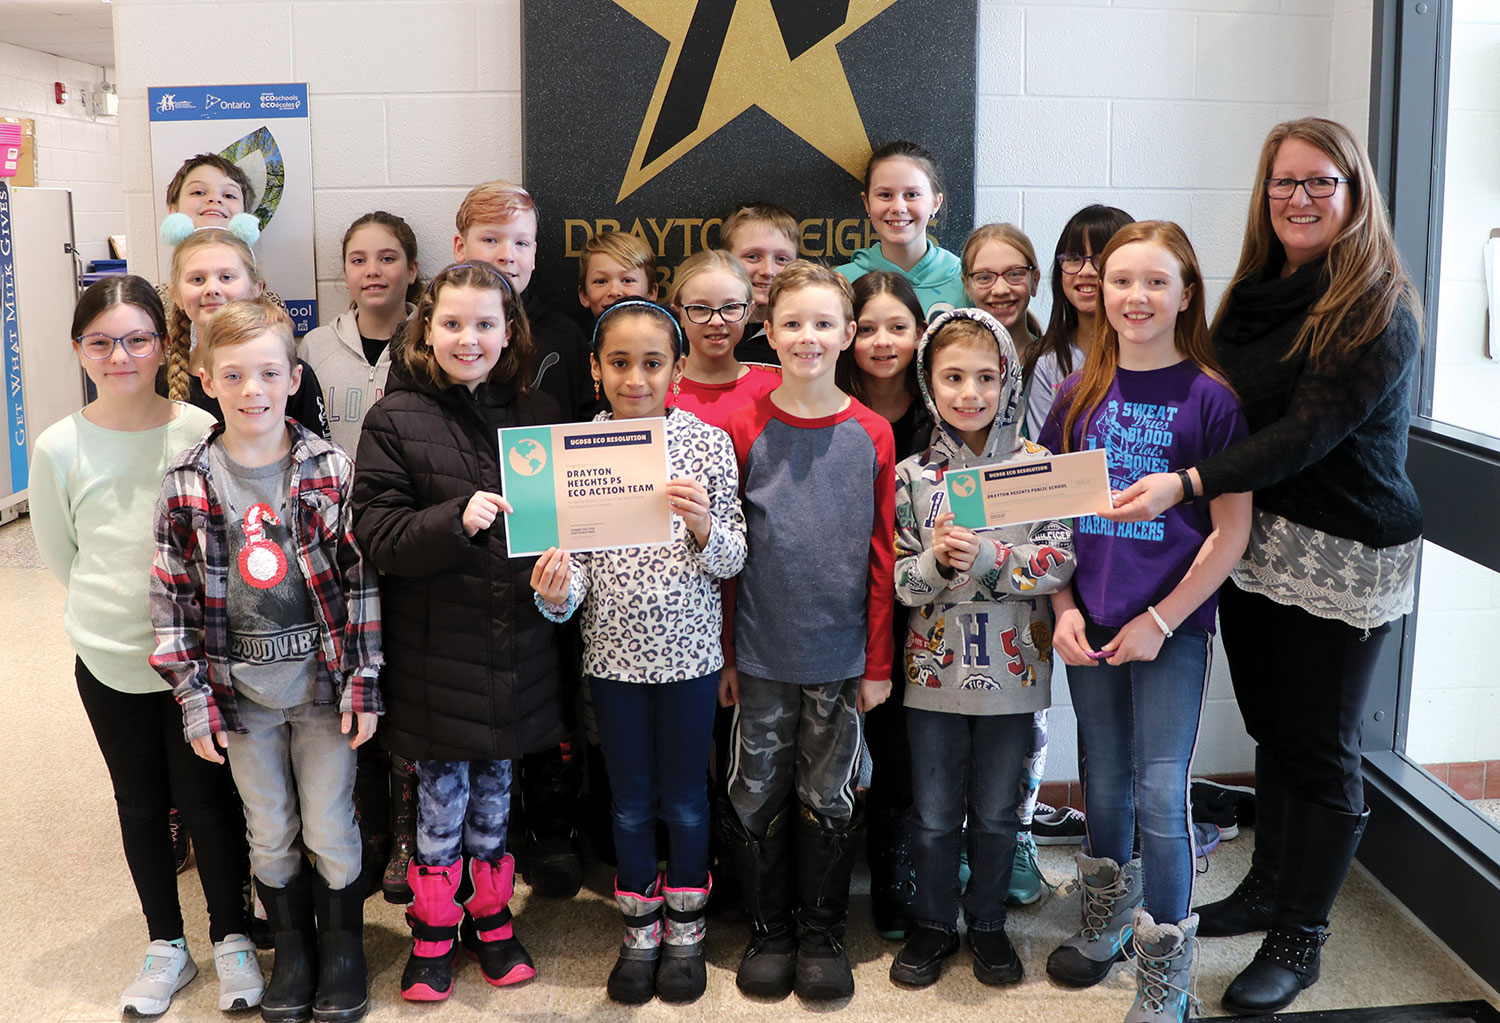 Students from Drayton Heights PS were named winners in the 2020 Eco Resolutions Contest.